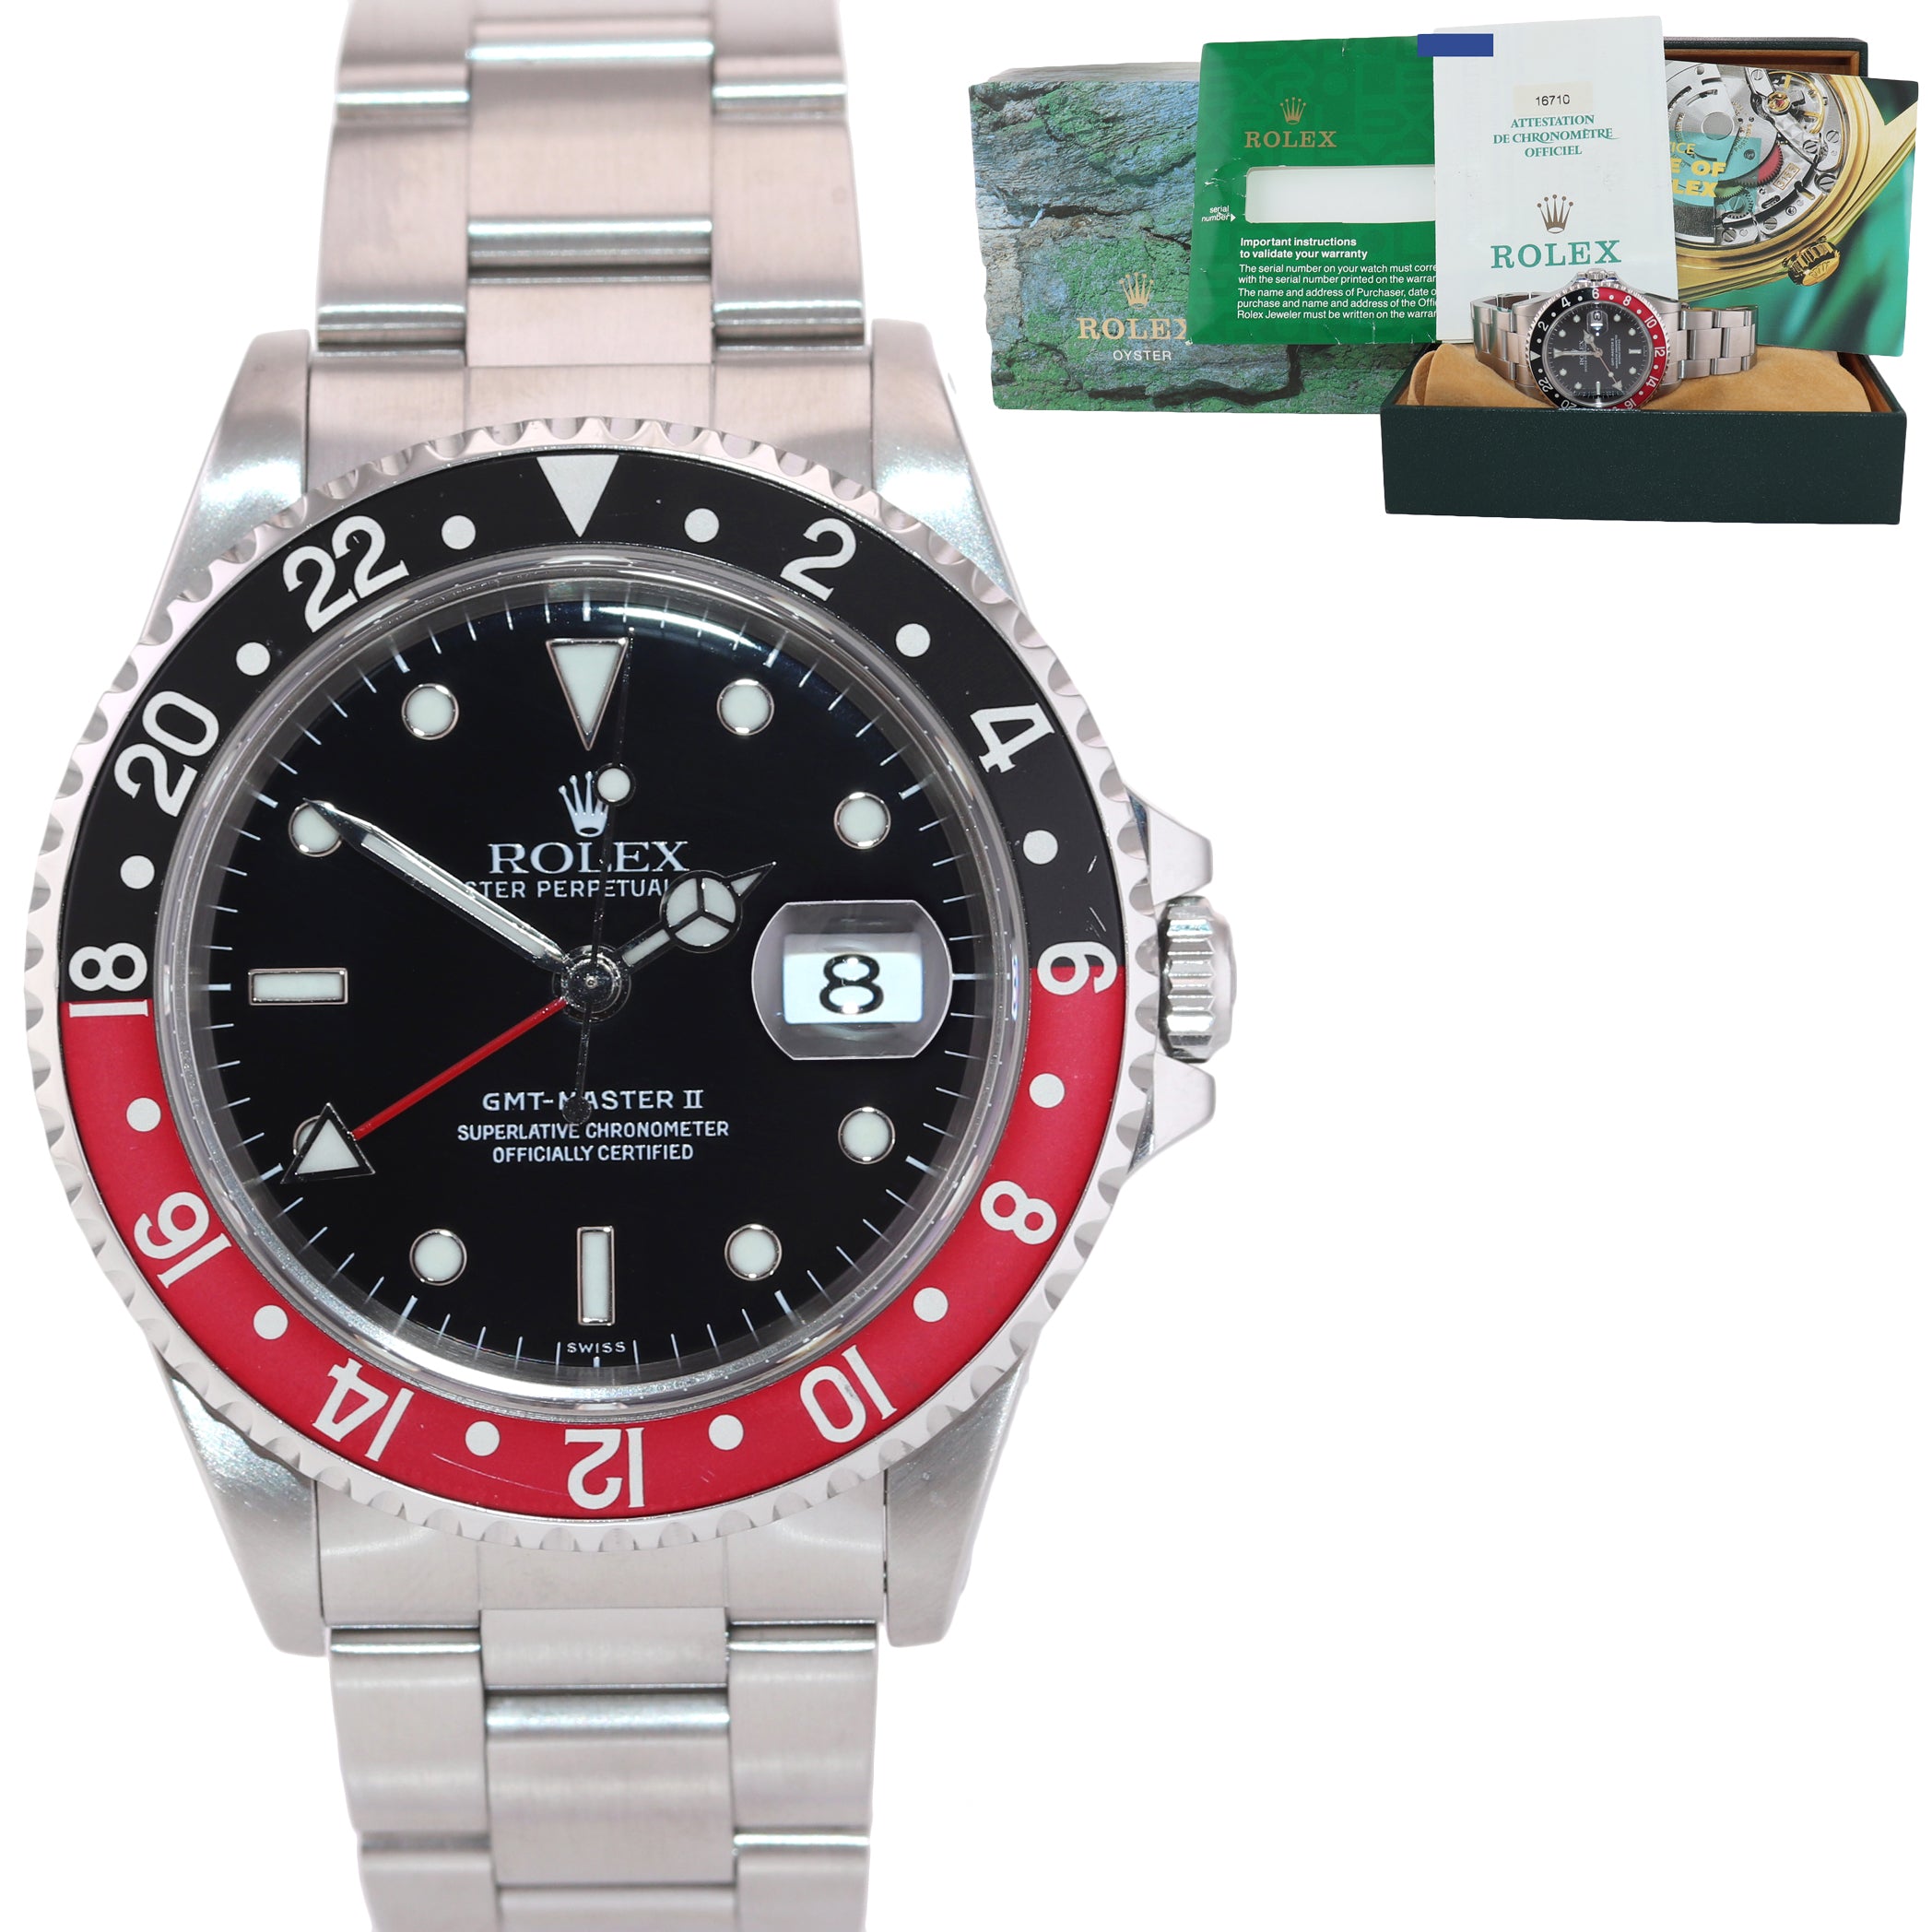 1999 PAPERS Rolex GMT-Master 2 Steel 16710 Watch Coke Red SWISS Only Dial Watch